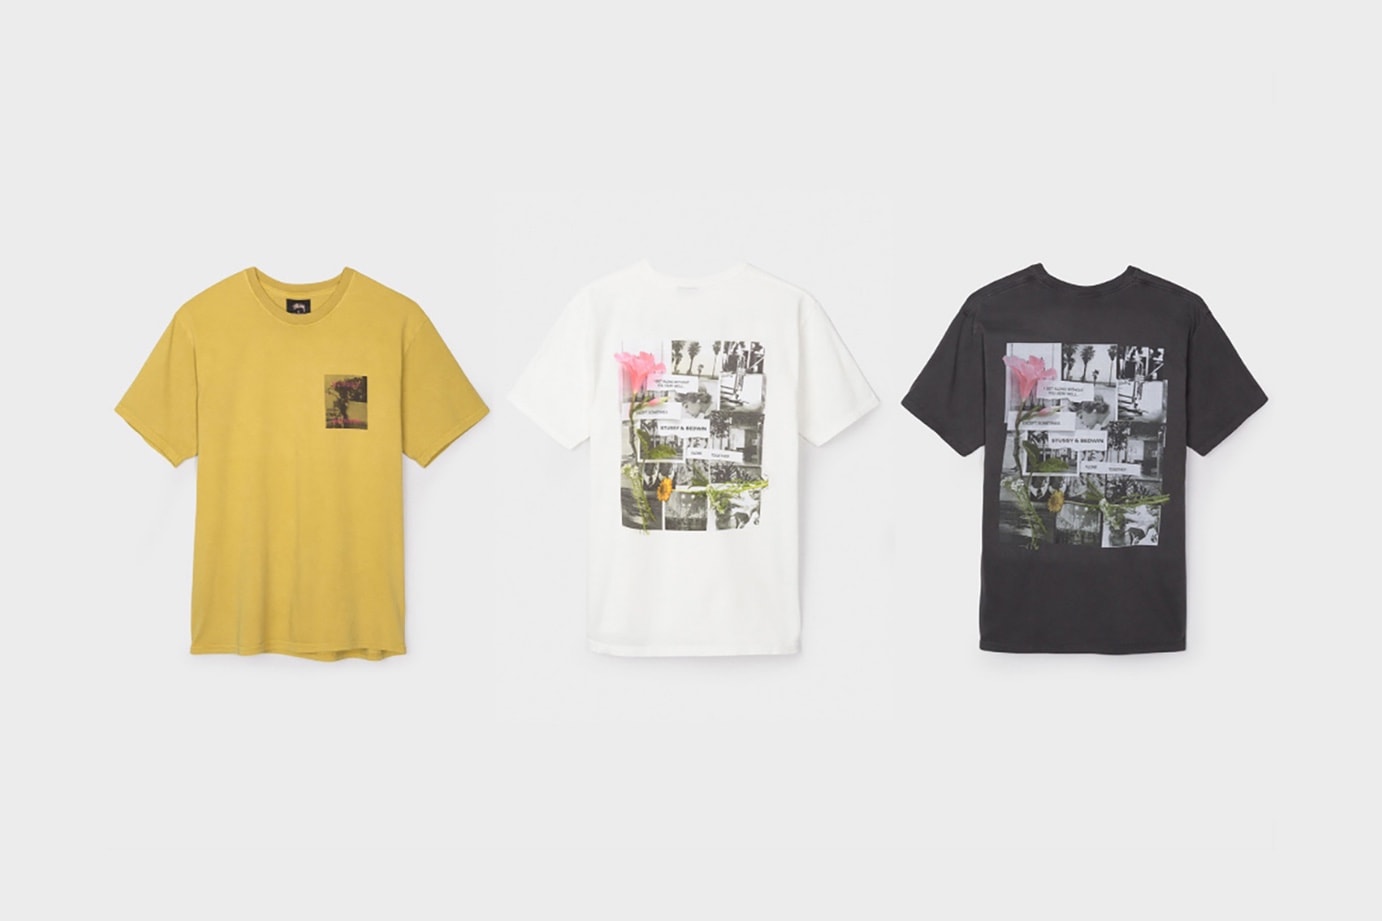 Stüssy x BEDWIN & THE HEARTBREAKERS "Alone Together"